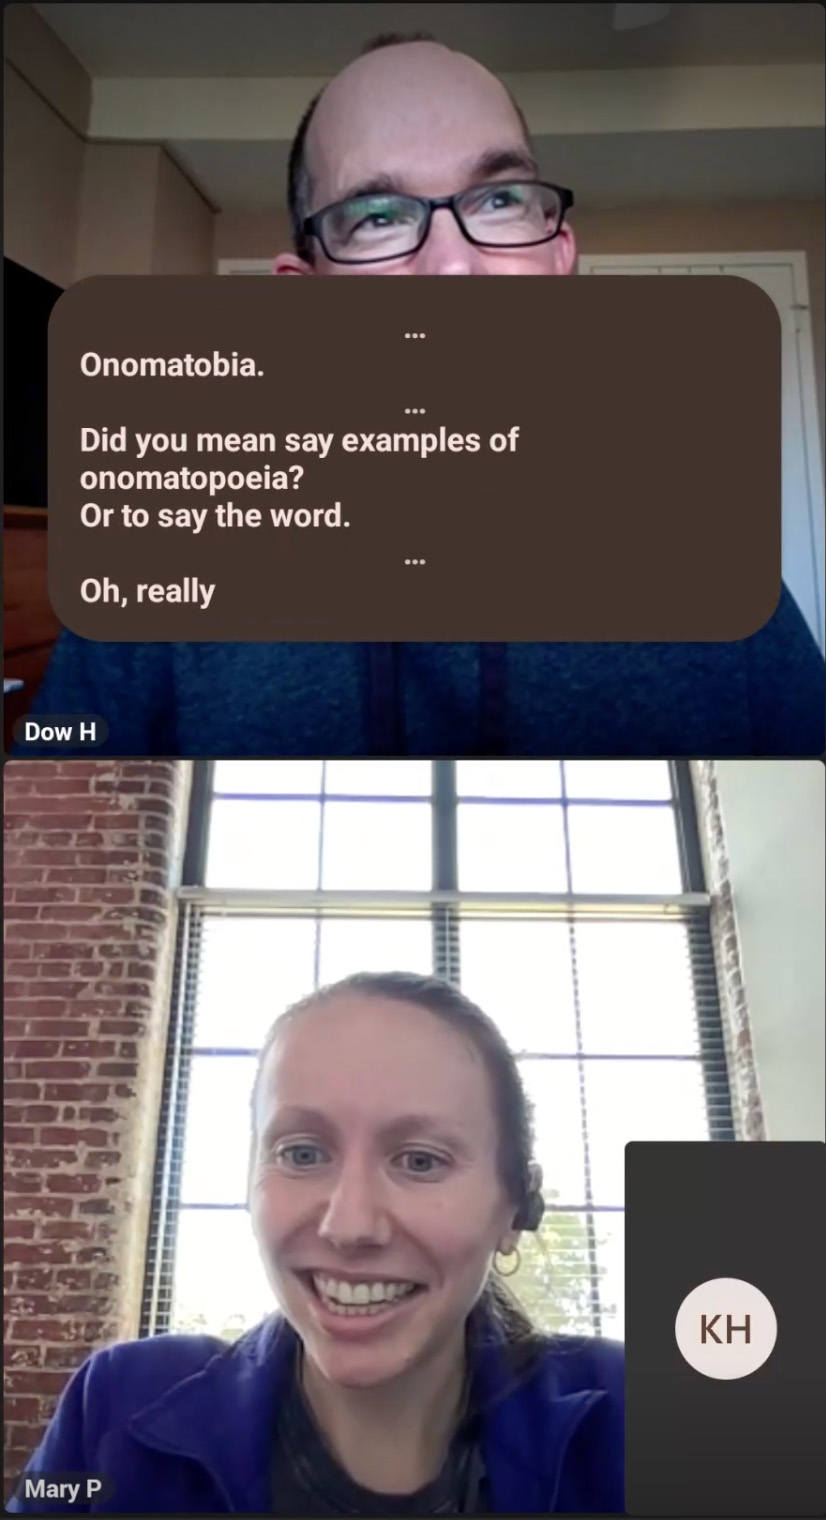 Screenshot of a Teams meeting with Android captions displayed. Captions read Onomatobia, Did you mean to say examples of onomatopeia? Or to say the word. Oh, really.